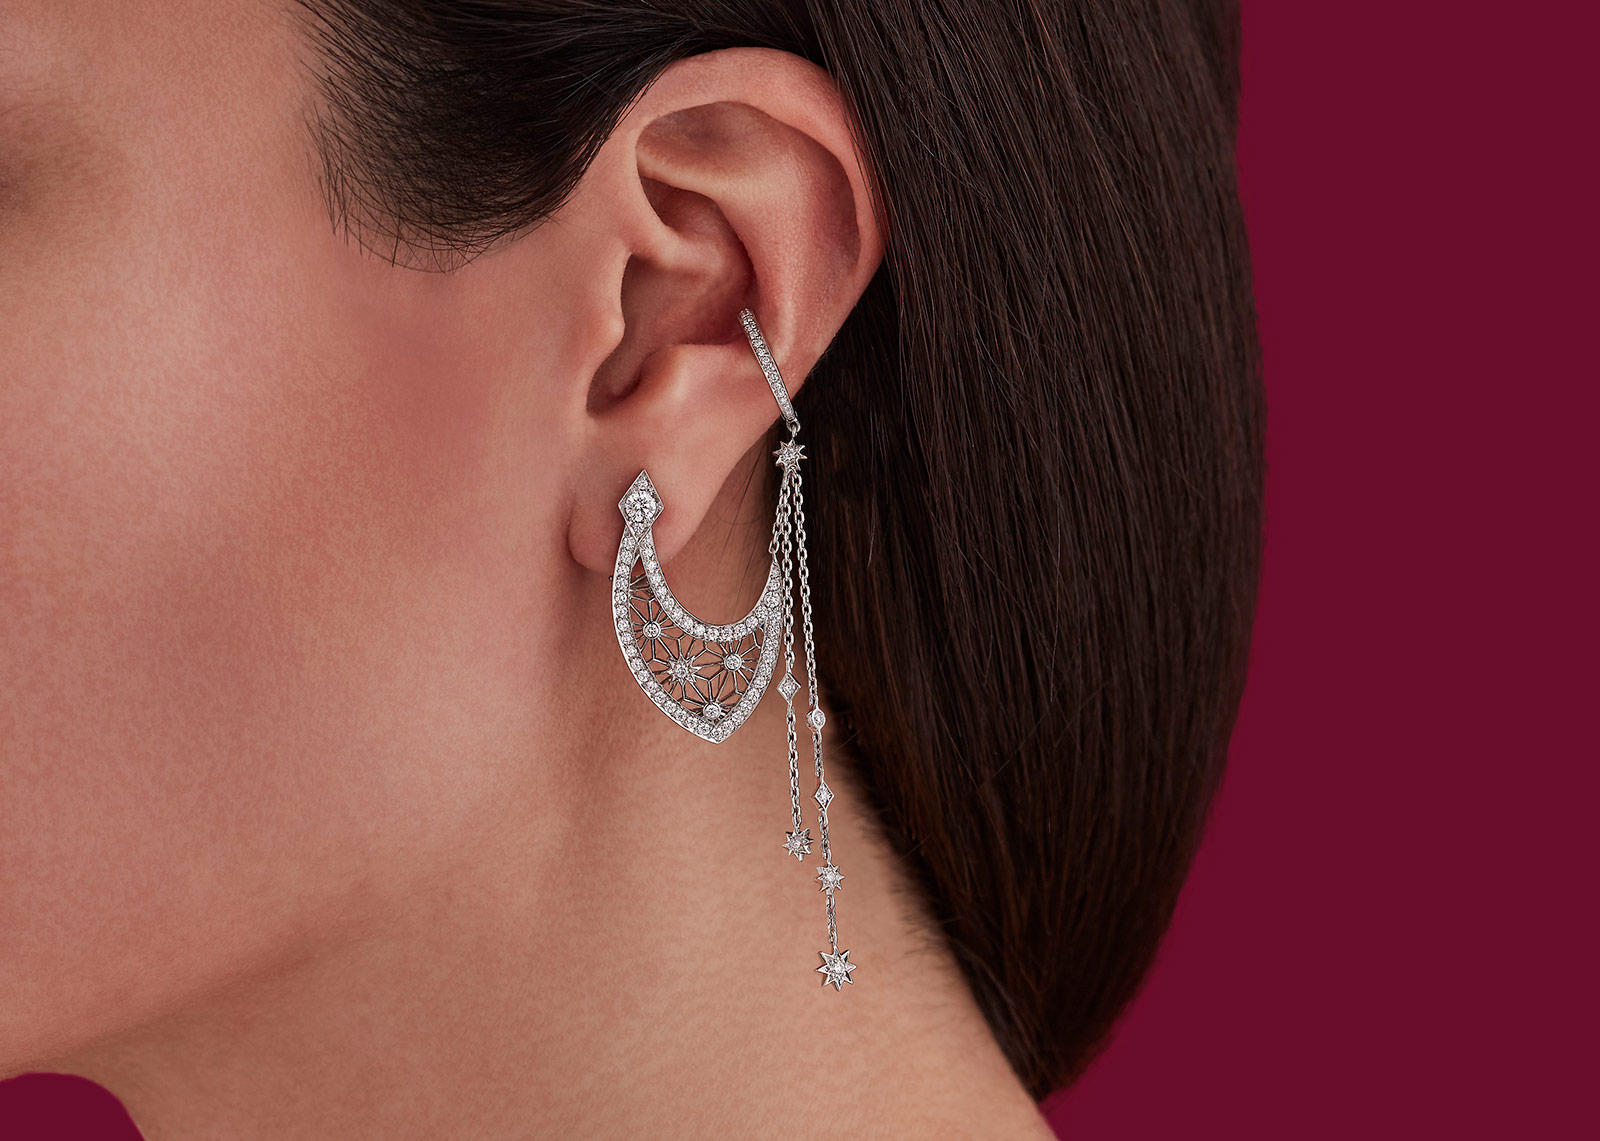 Garrard Filigree Chain hoop earrings with diamonds from Muse collection